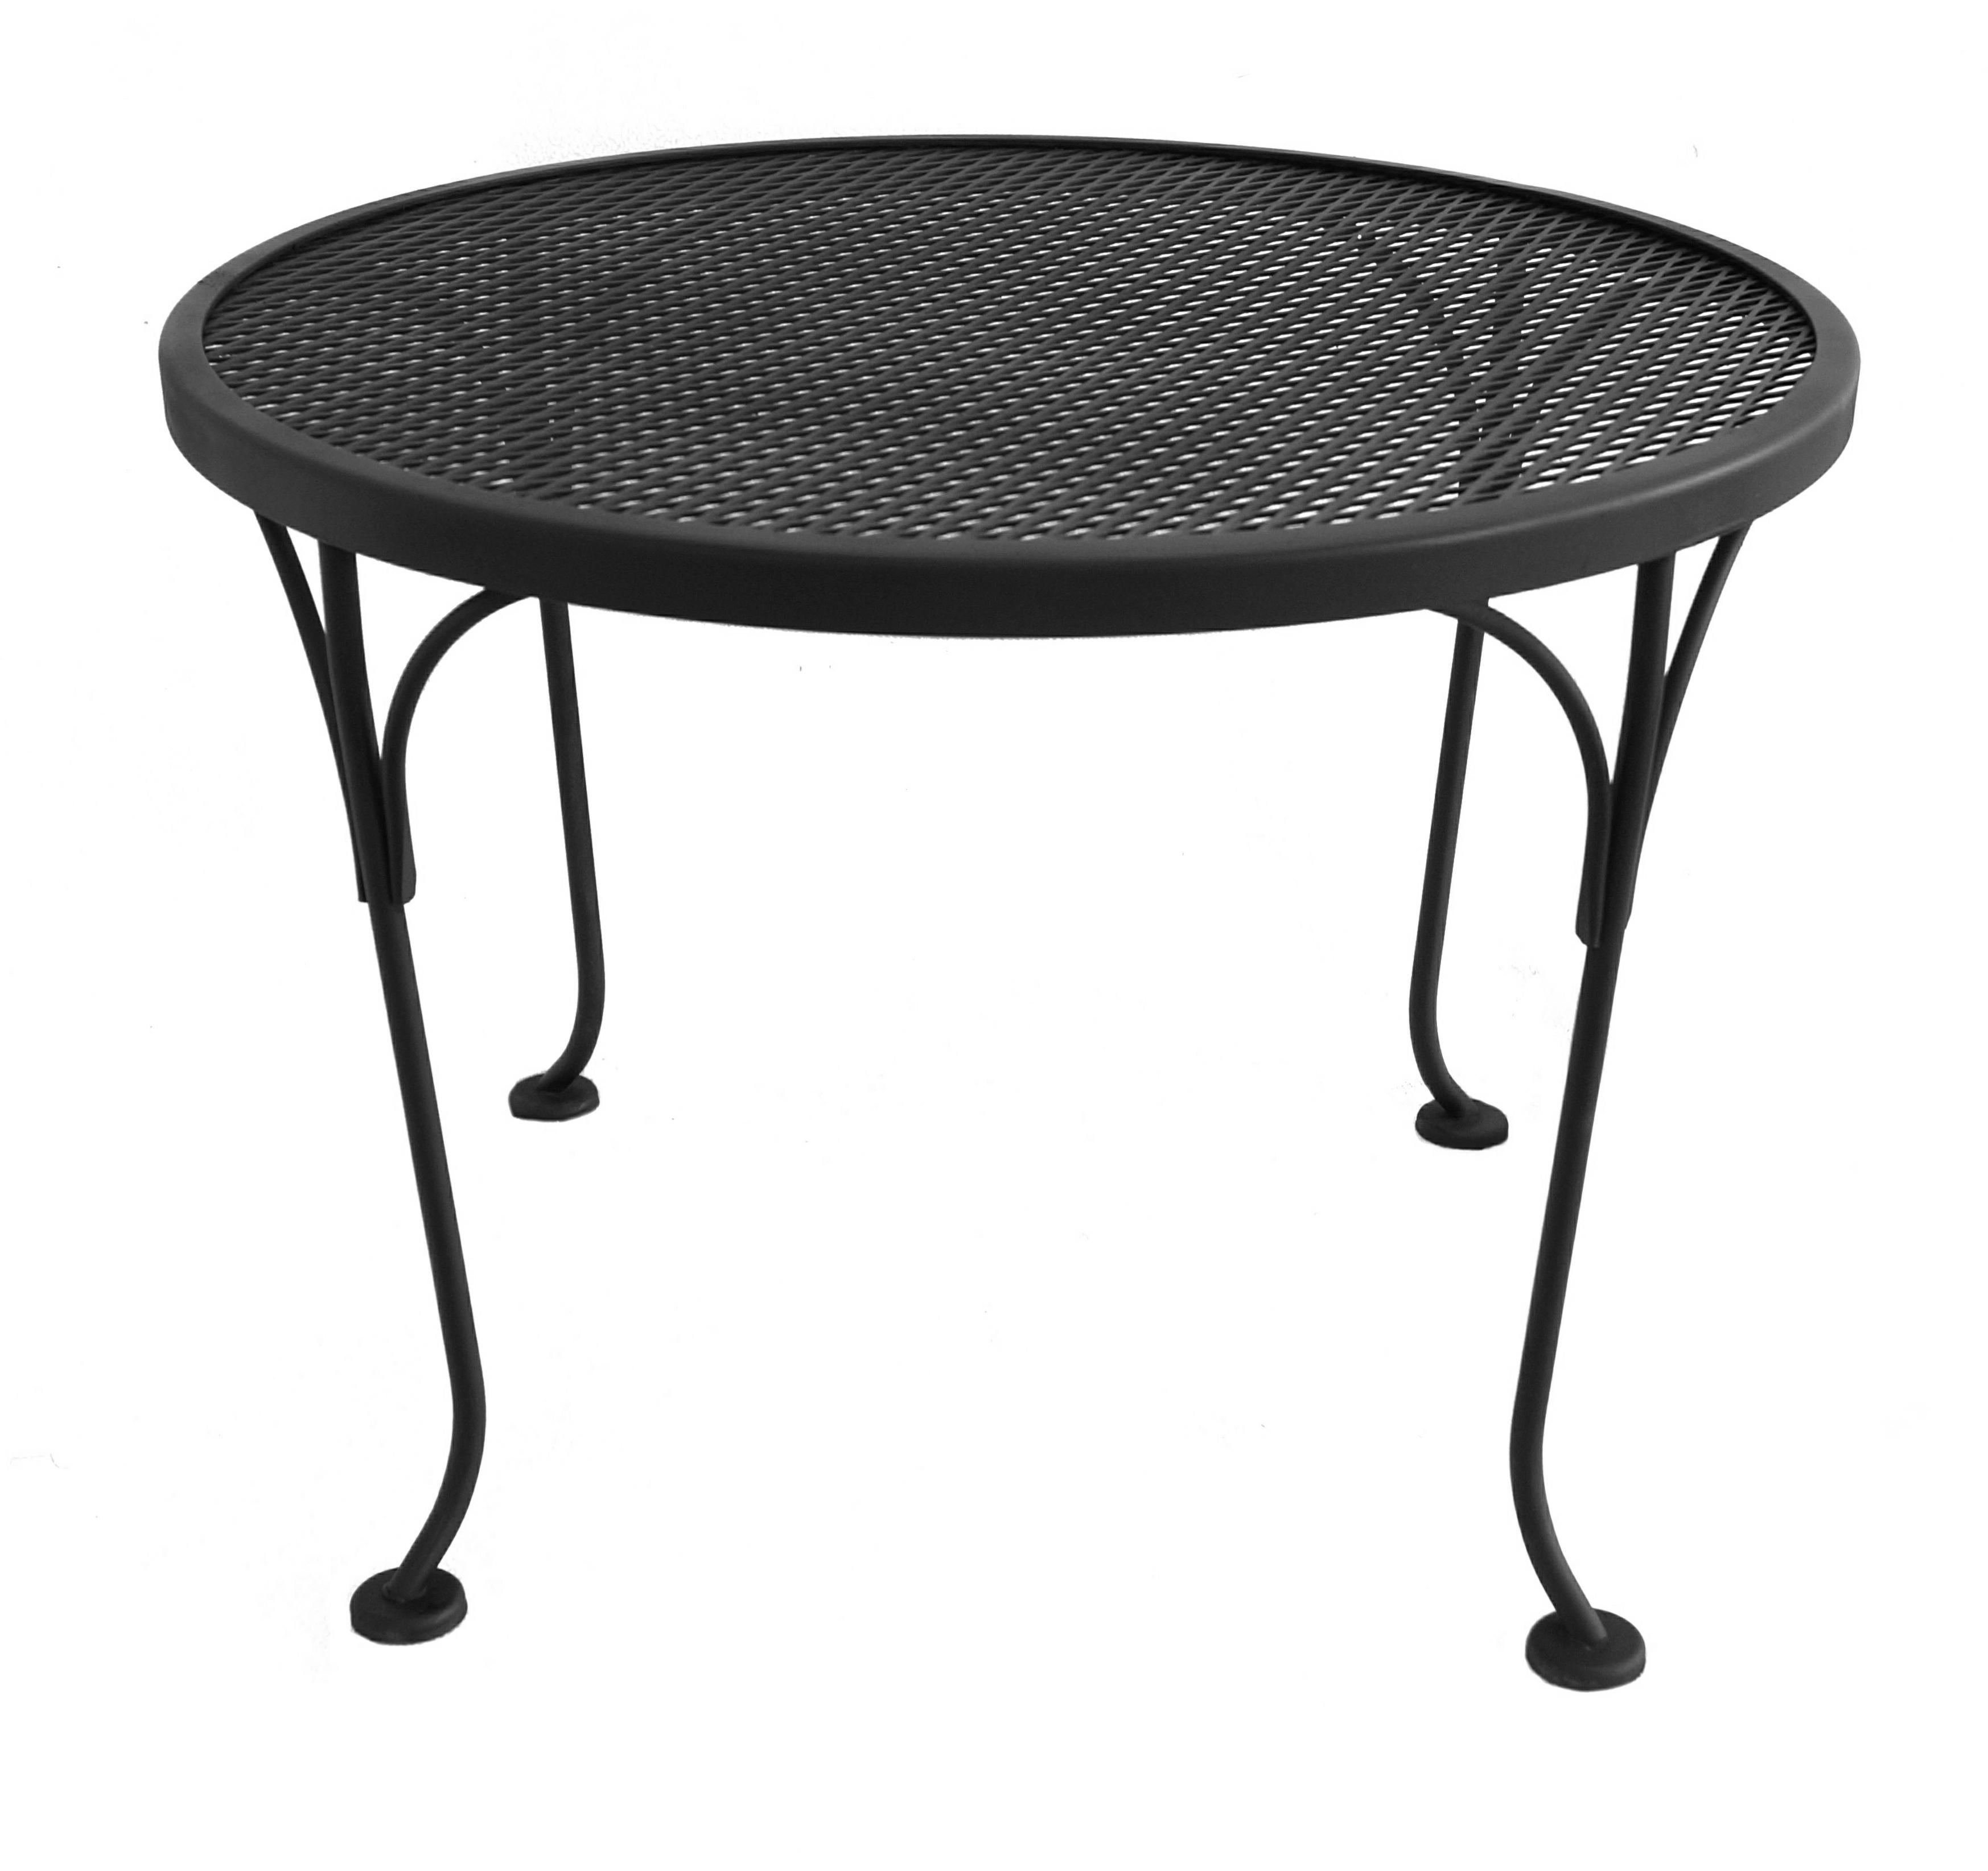 Russell Woodard Furniture Round Black Wrought Iron Patio Coffee or Side Table often seen along side his Sculptura line chairs and settees